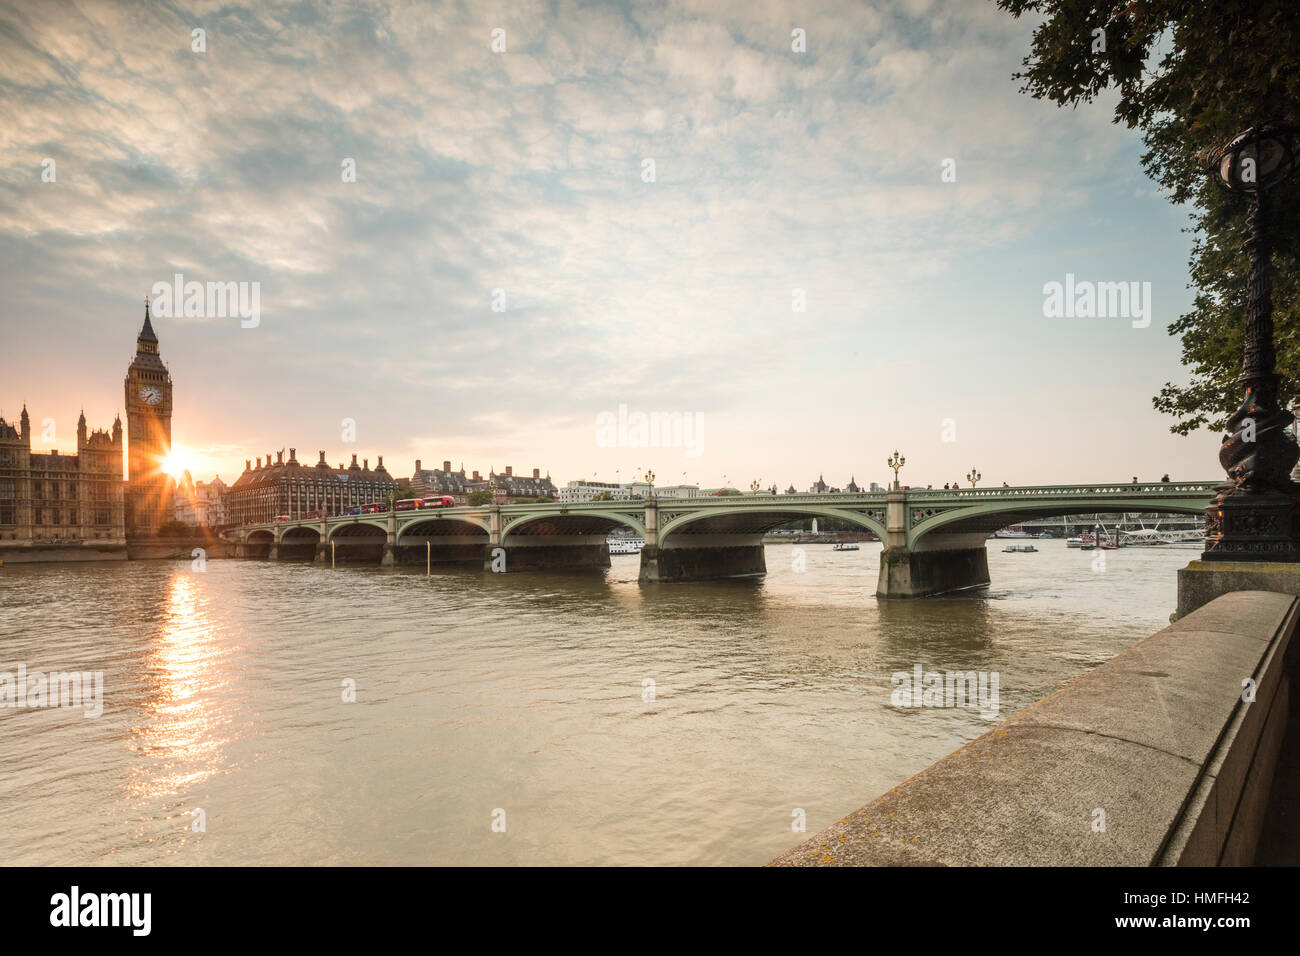 Westminster Bridge on River Thames with Big Ben and Palace of Westminster in the background at sunset, London, England, UK Stock Photo